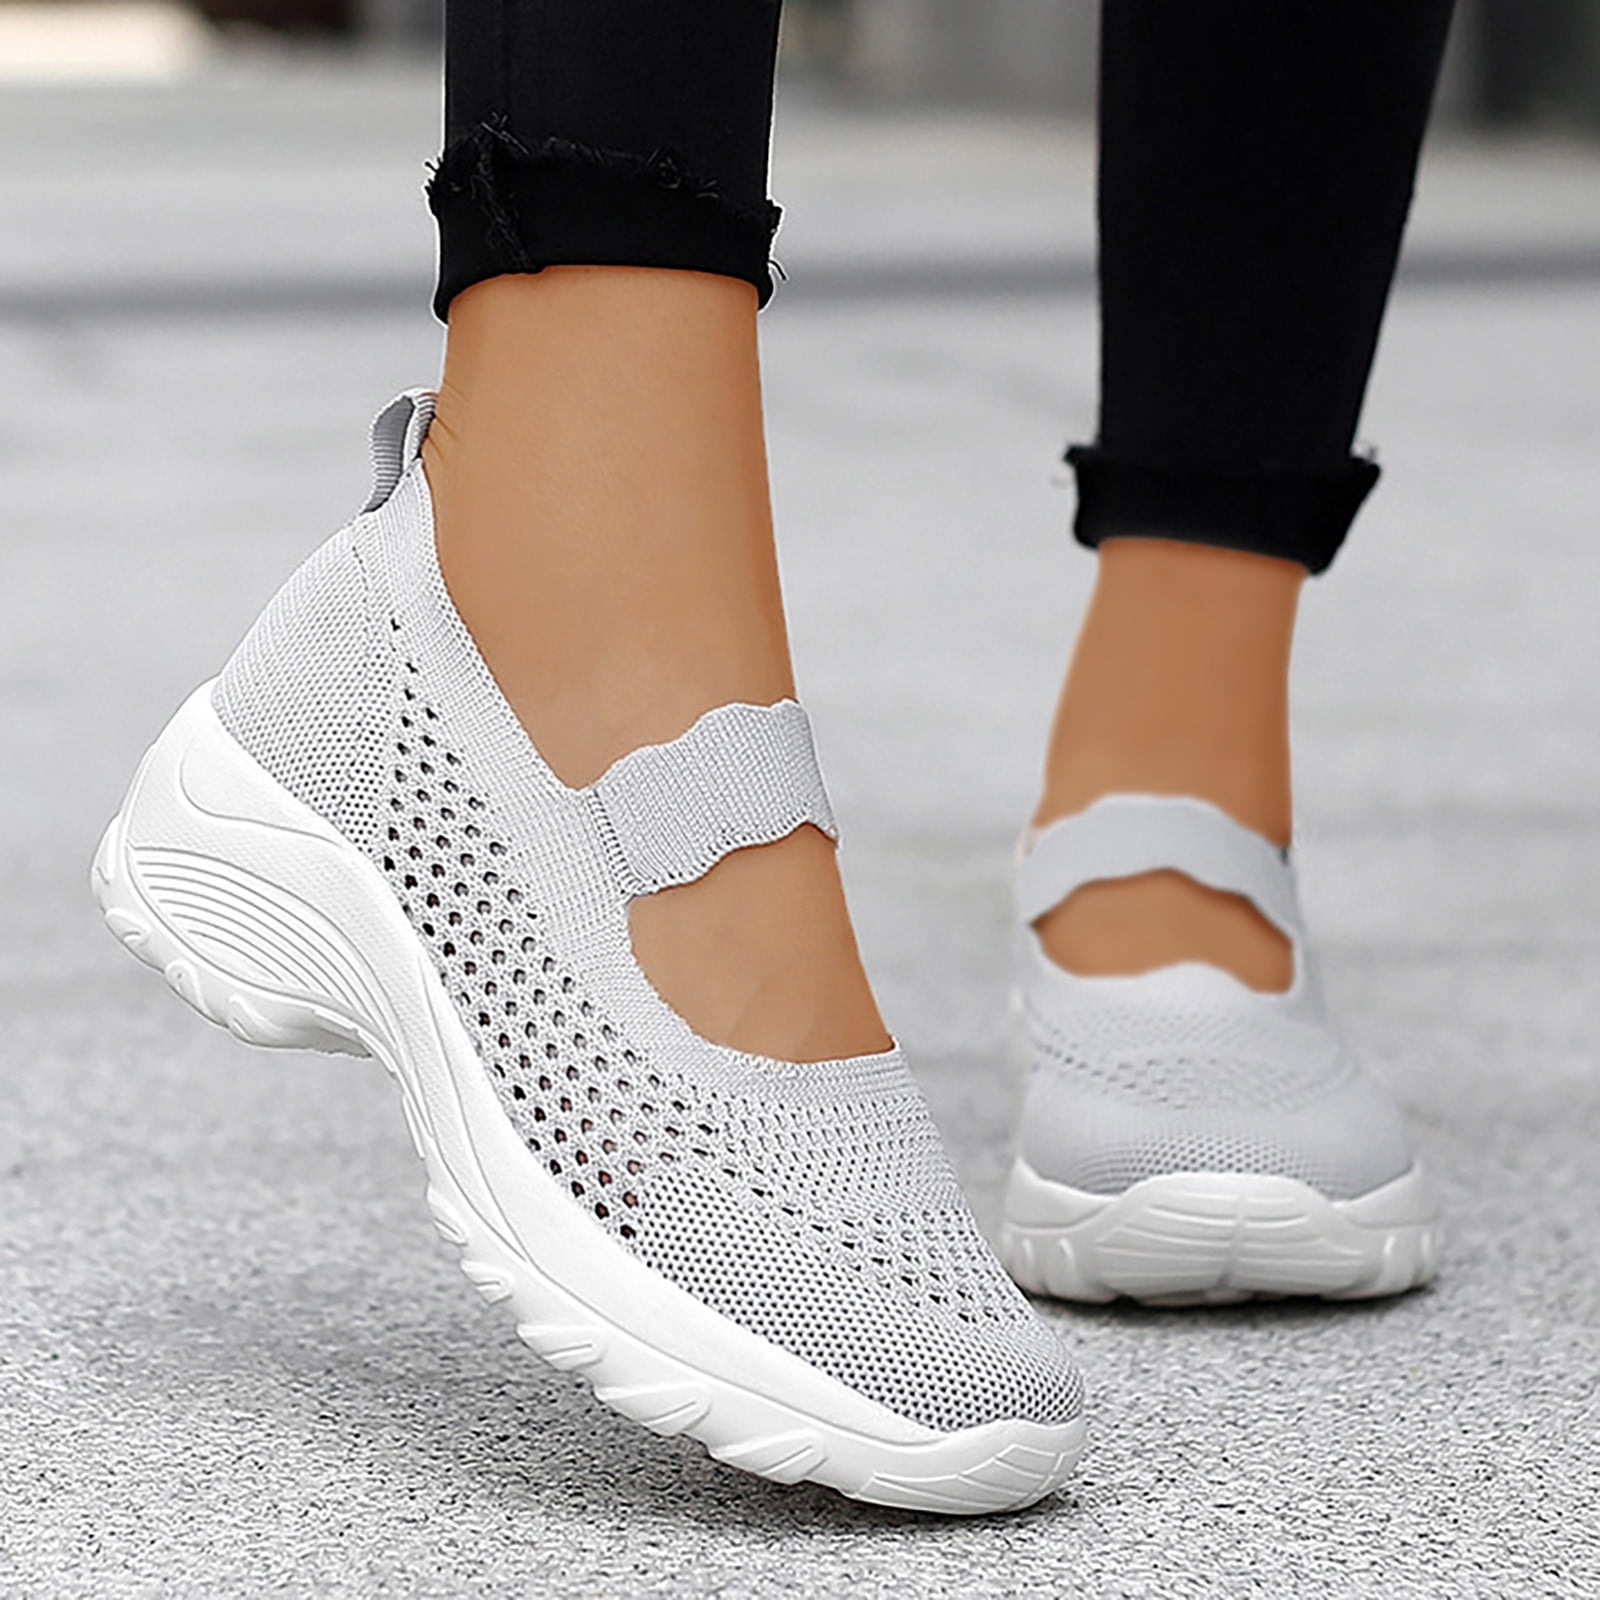 Women's Fashion Breathable Wedge Heels Sneakers Summer F Sports Casual Shoes Hot 